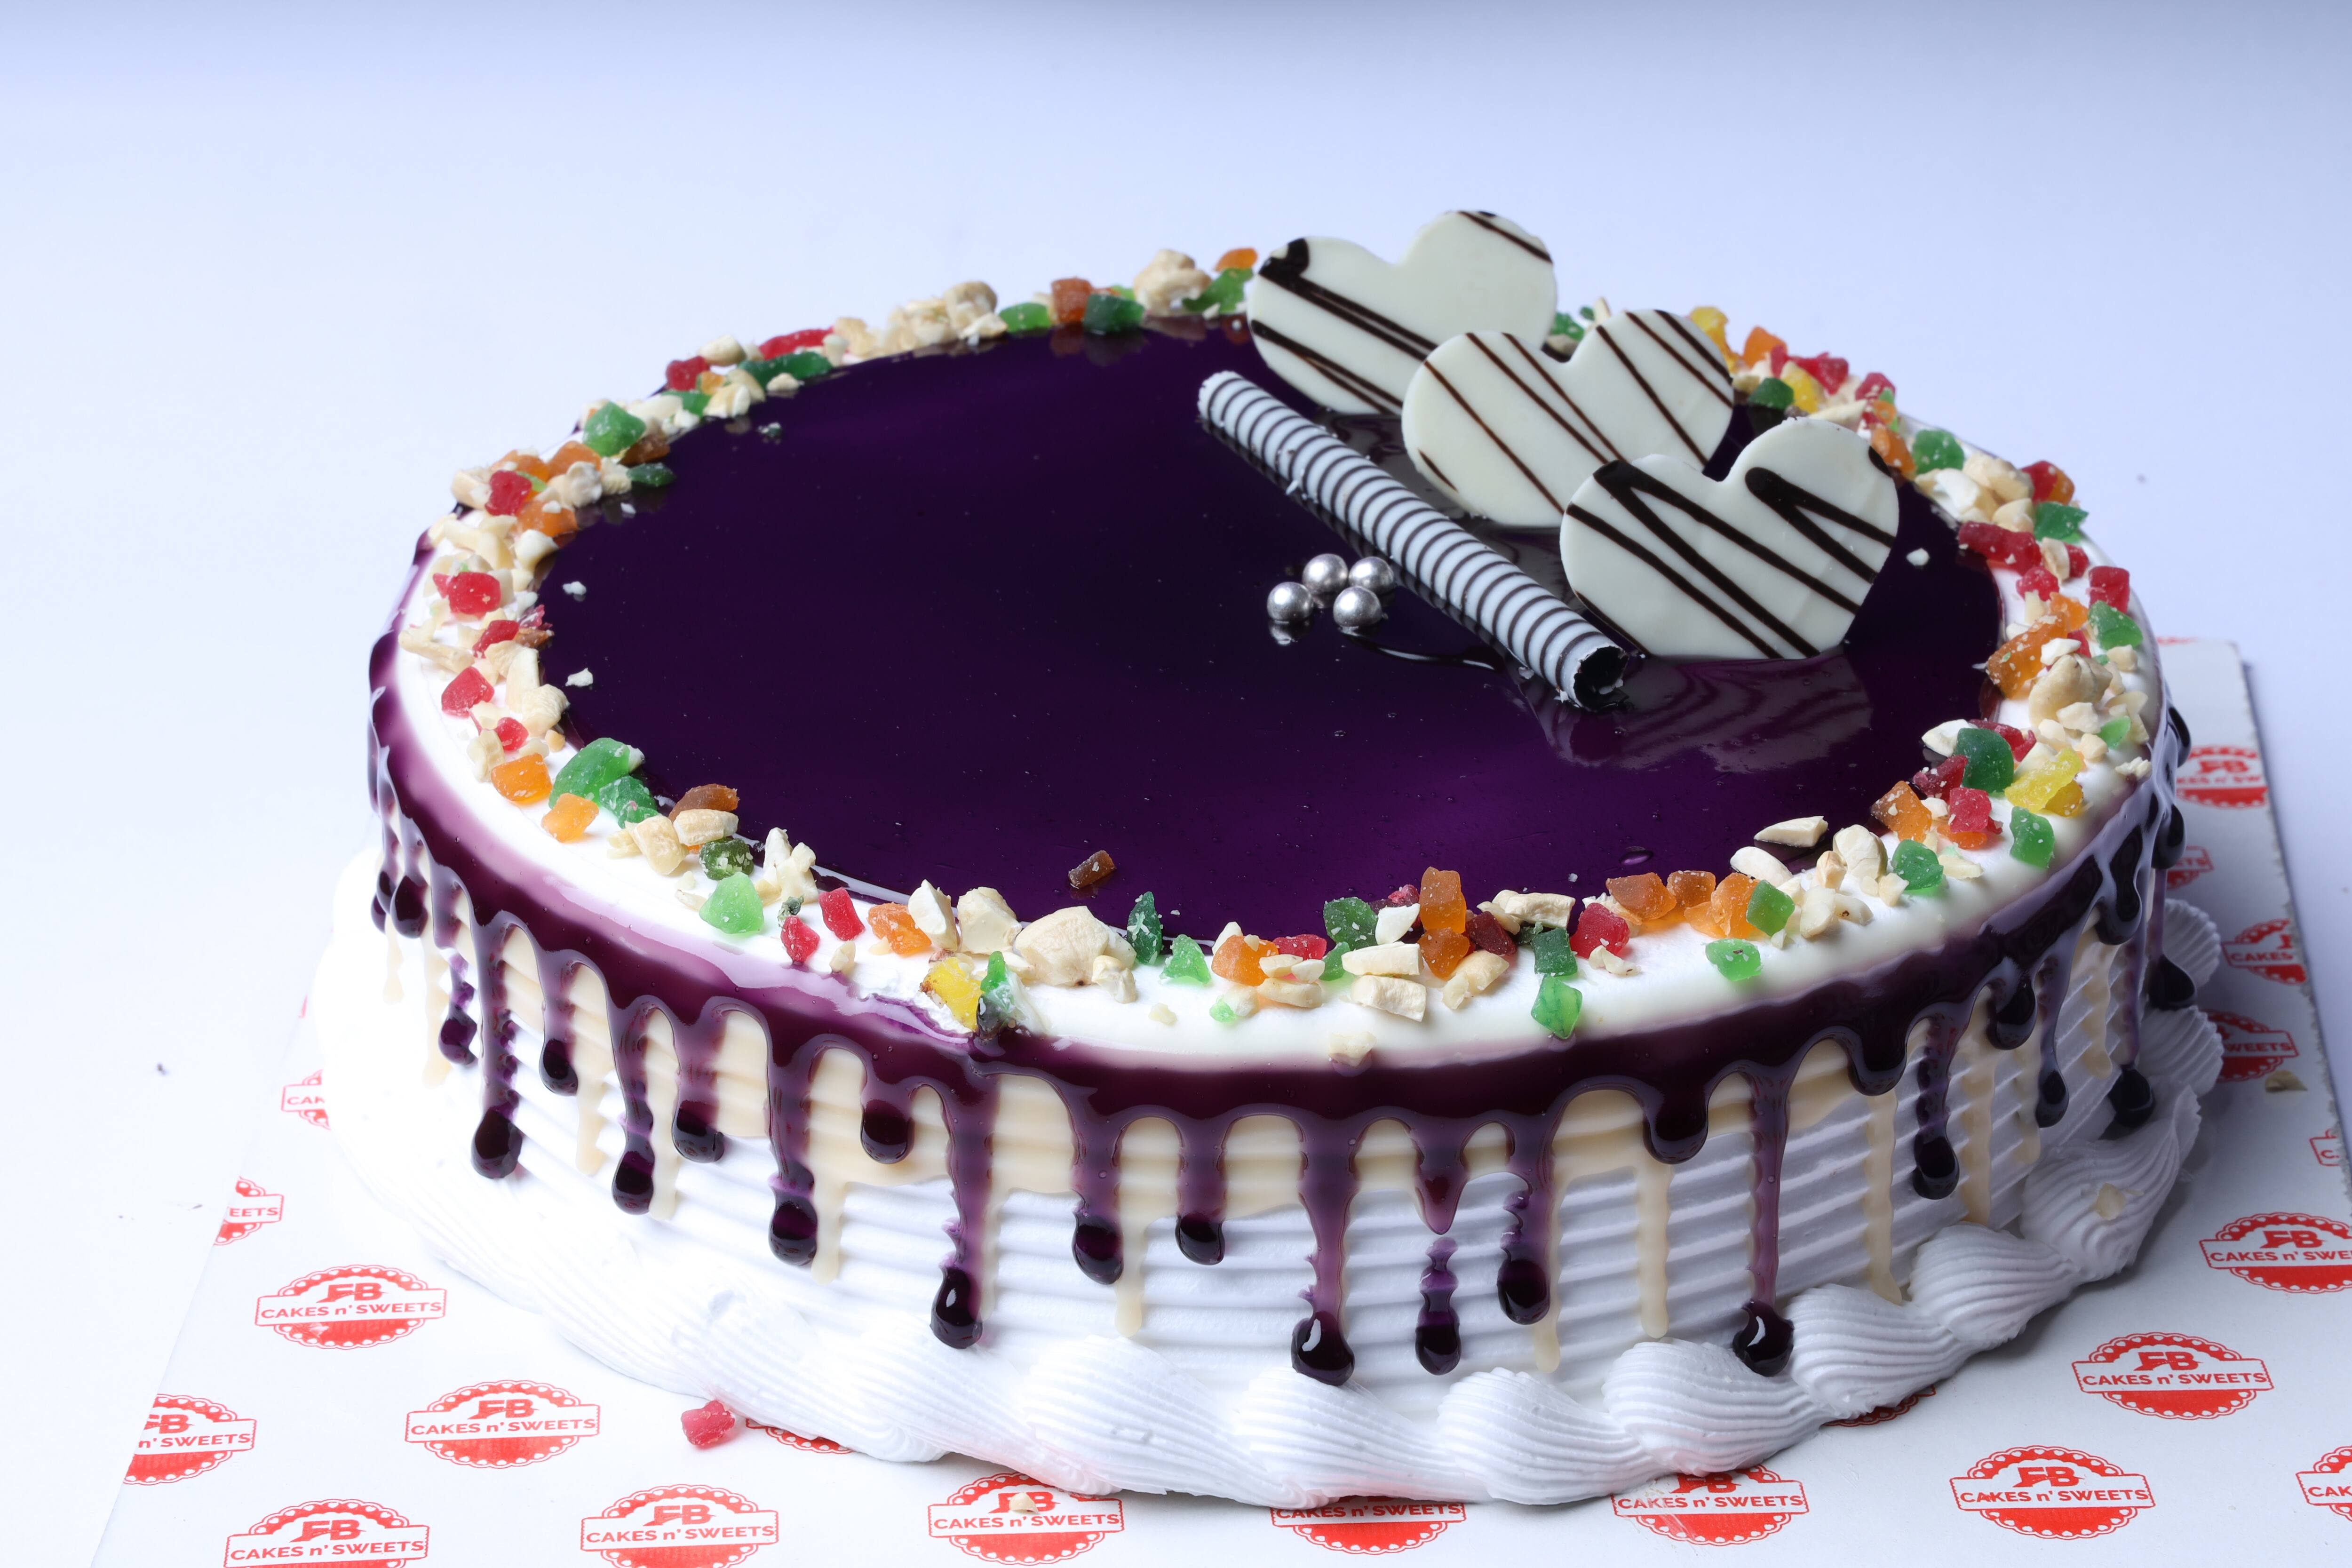 Find list of Fb Cakes in Whitefield, Bangalore - Justdial